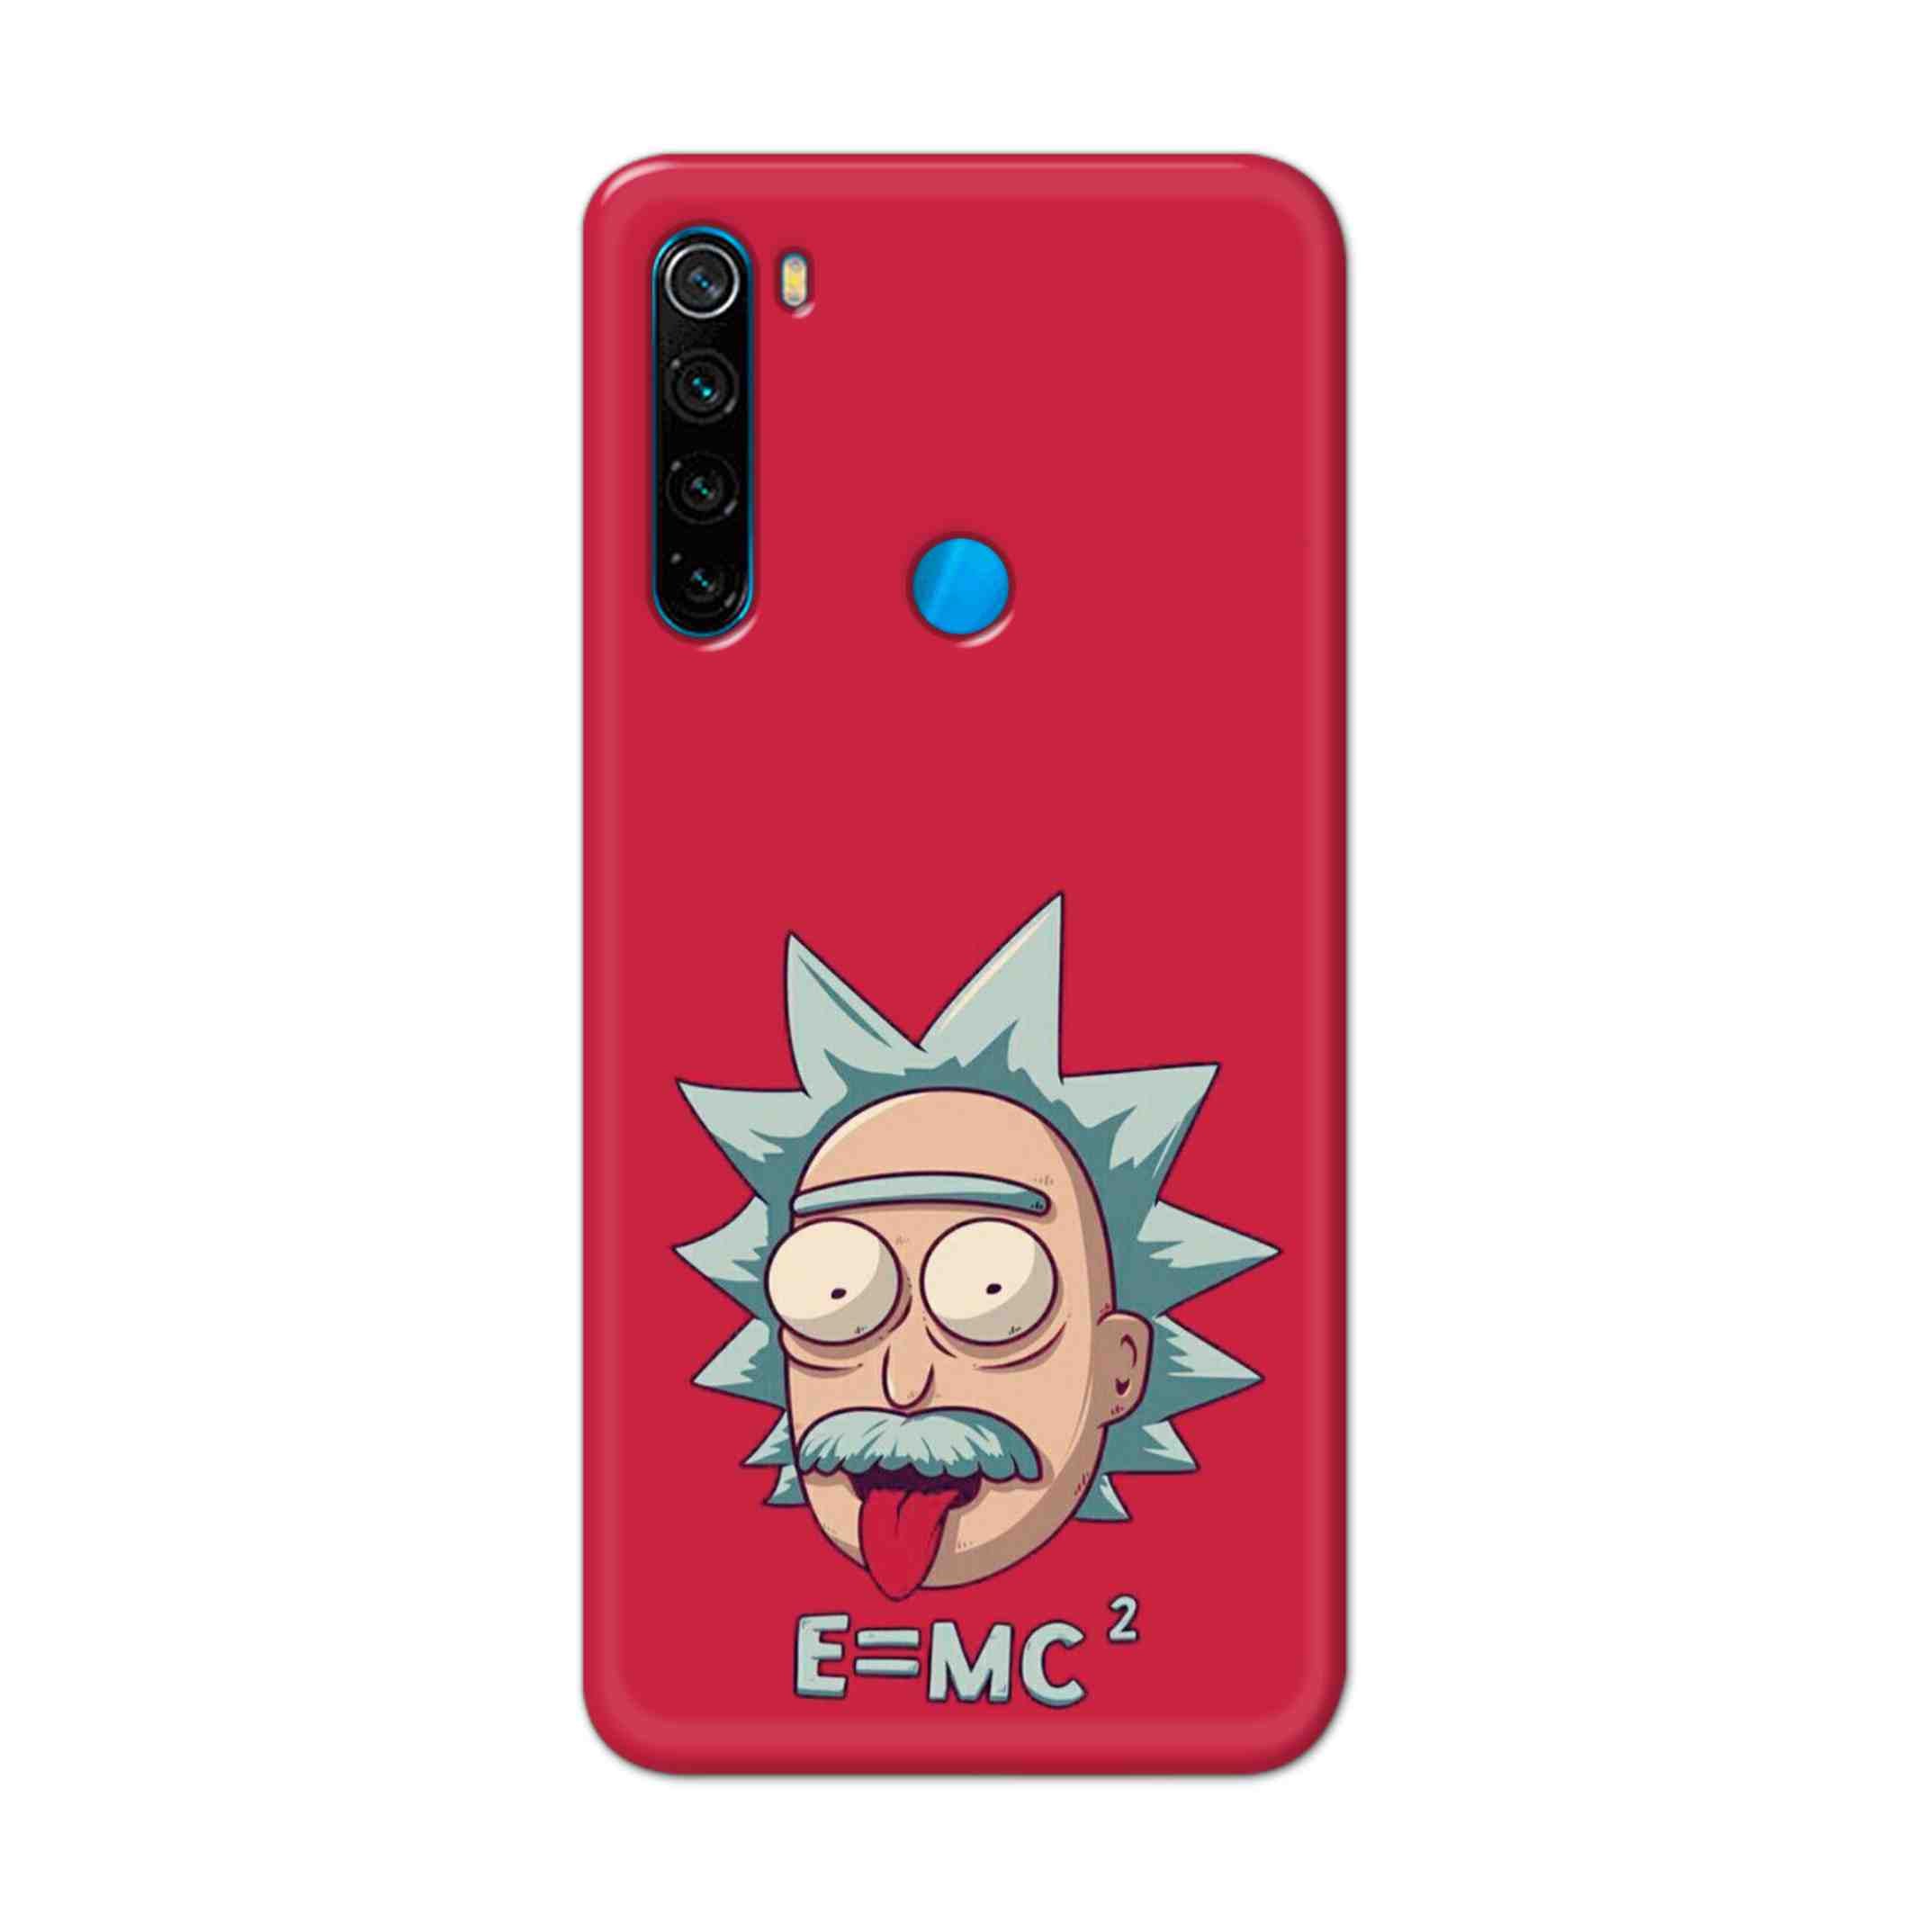 Buy E=Mc Hard Back Mobile Phone Case Cover For Xiaomi Redmi Note 8 Online